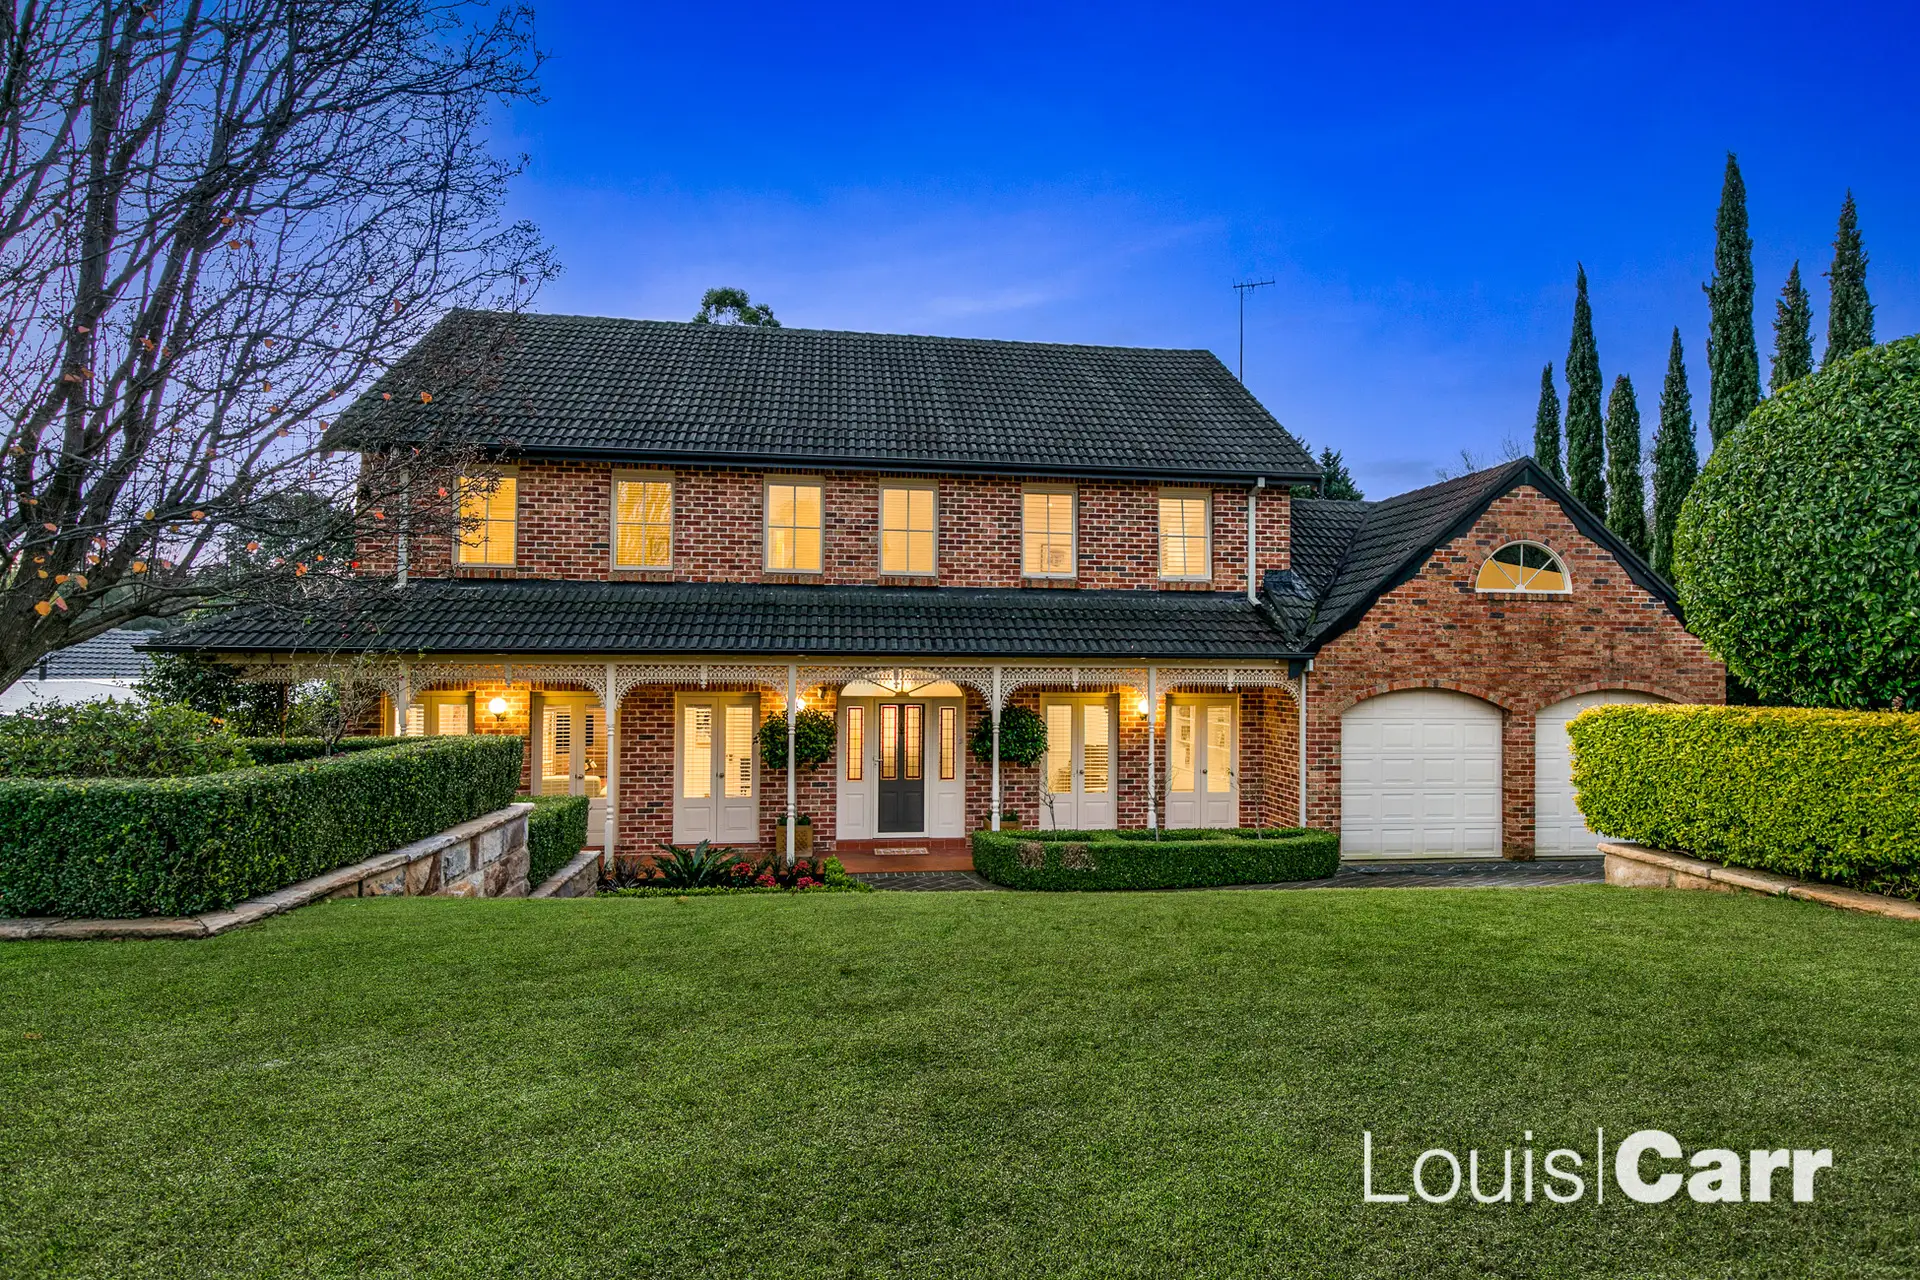 Photo #2: 16 Bellbird Drive, West Pennant Hills - Sold by Louis Carr Real Estate